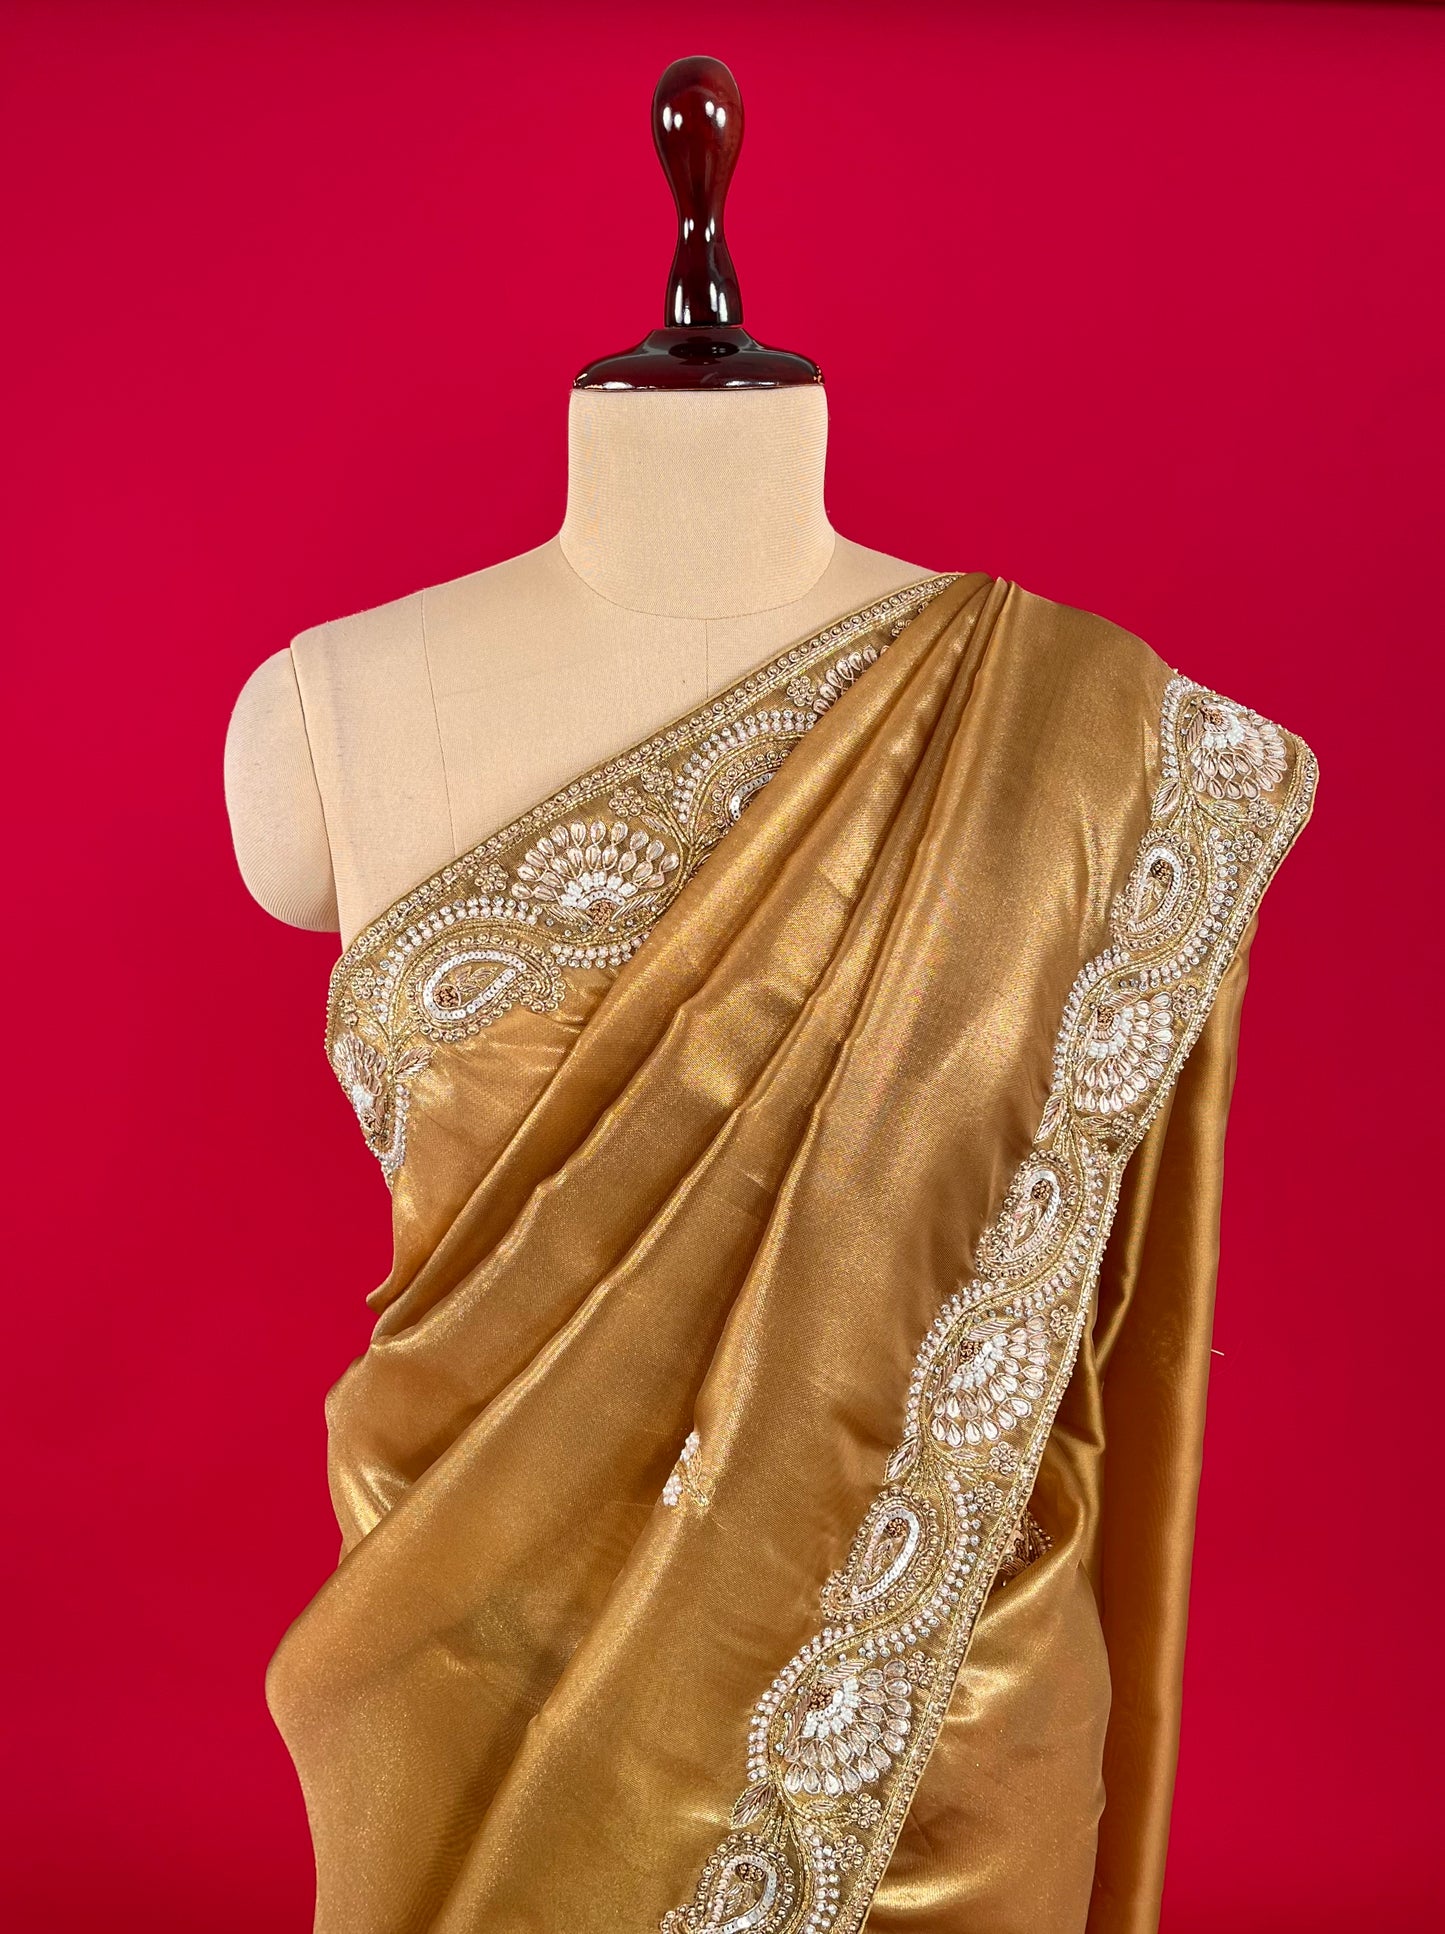 GOLDEN COLOUR ORGANZA TISSUE EMBROIDERED SAREE EMBELLISHED WITH CUTDANA, SEQUINS & GOTA PATTI WORK